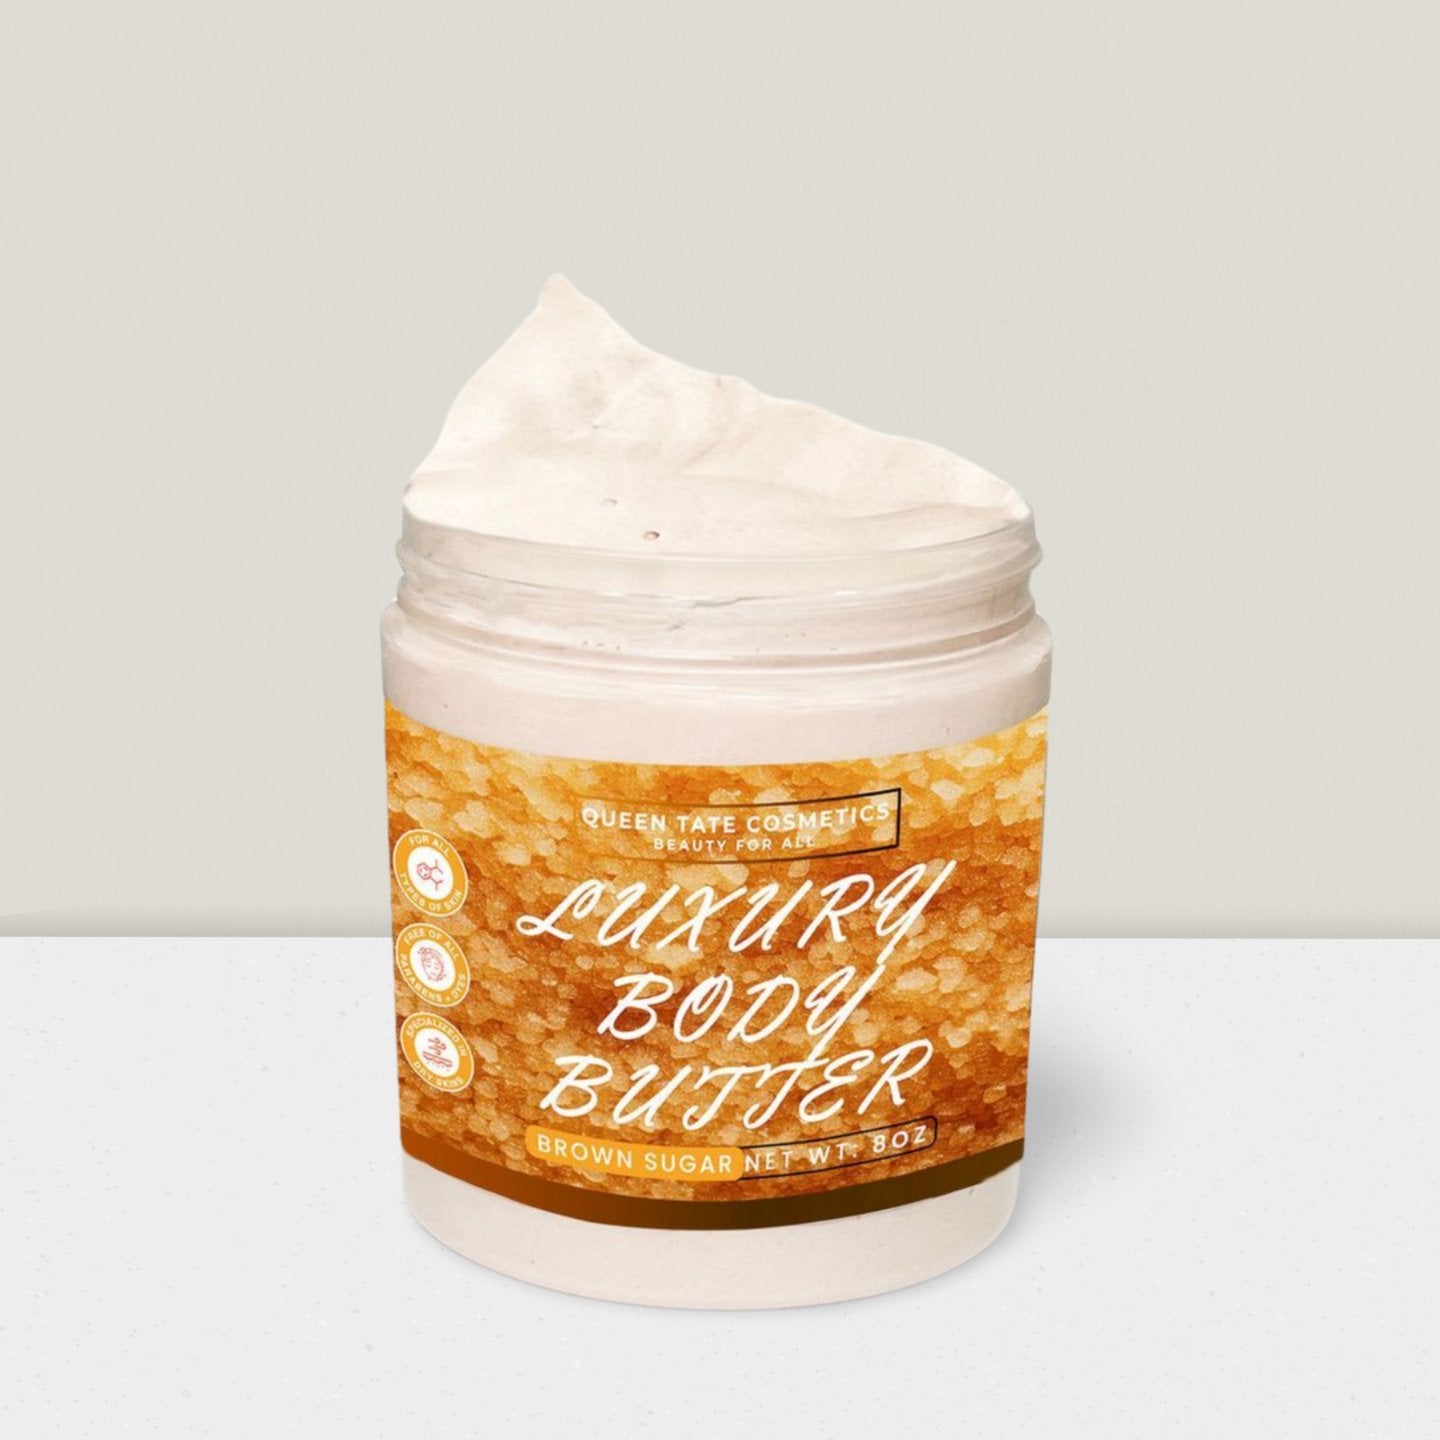 Brown Sugar-Handcrafted Body Butter - Queen Tate CosmeticsHandcrafted Luxury Body ButterBrown Sugar-Handcrafted Body ButterHandcrafted Luxury Body ButterQueen Tate Cosmetics 8oz